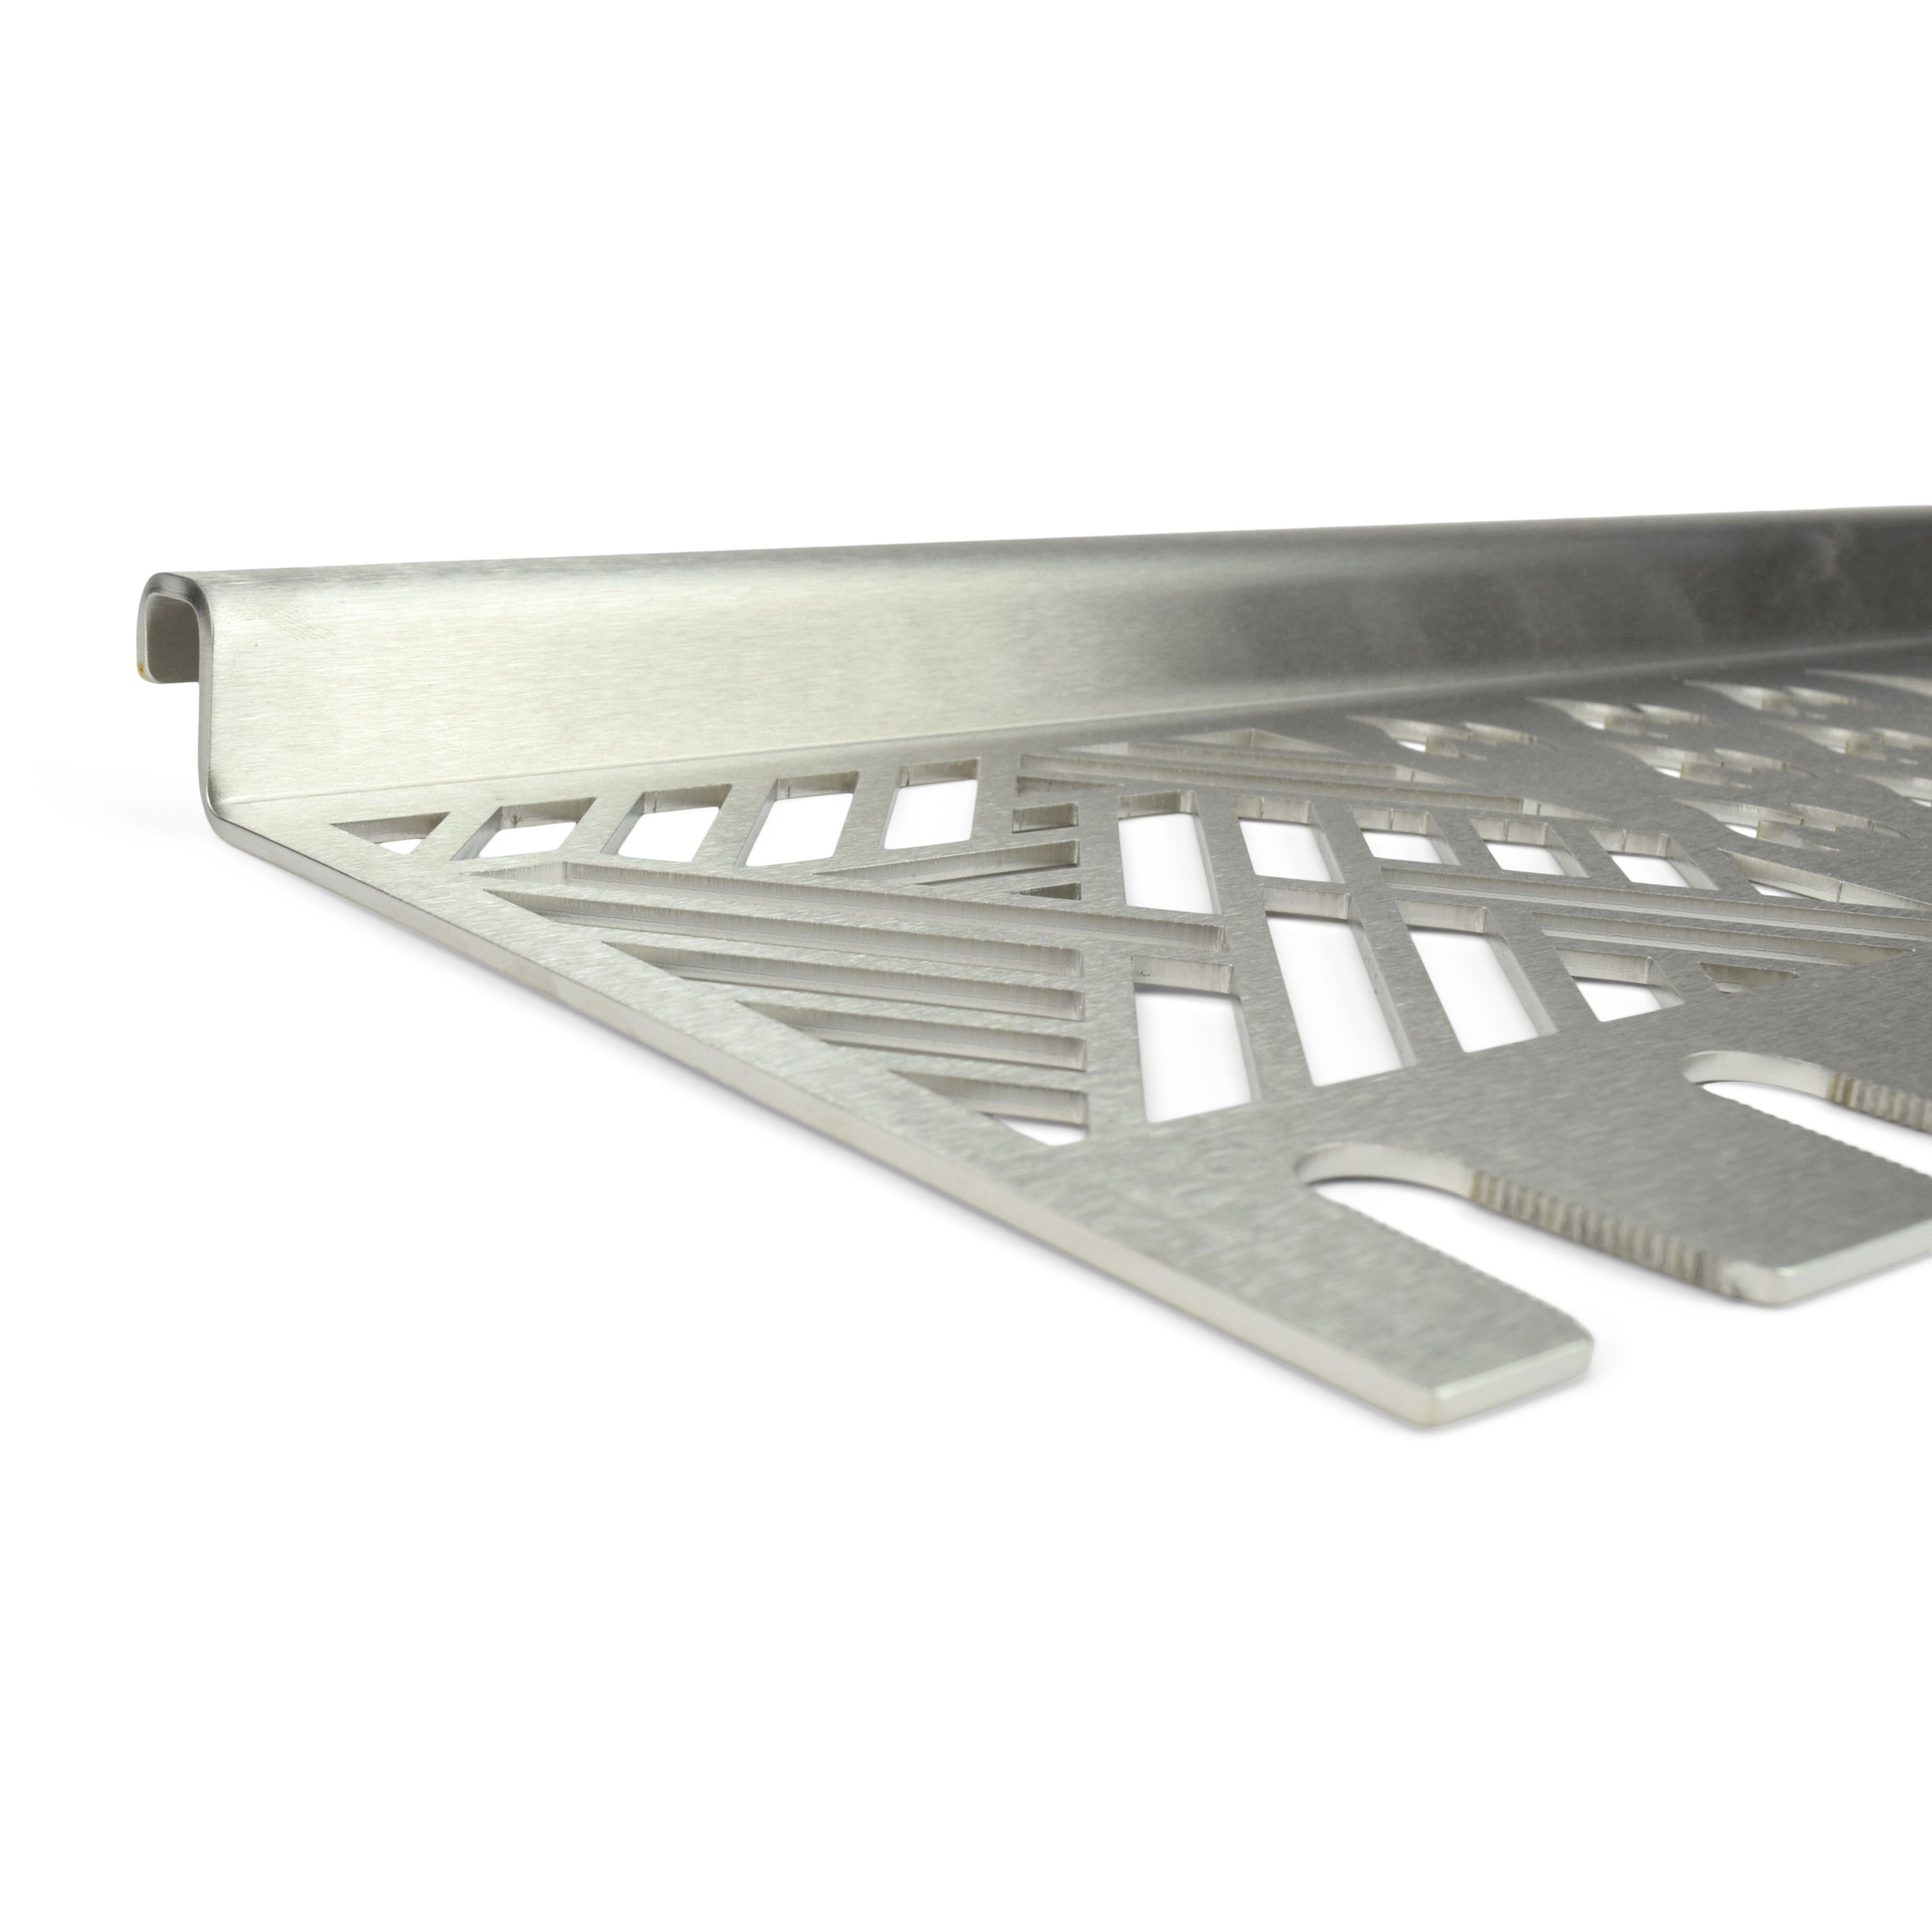 Stainless steel MultiStation for Weber Genesis 2 300 Series - Hot Grate